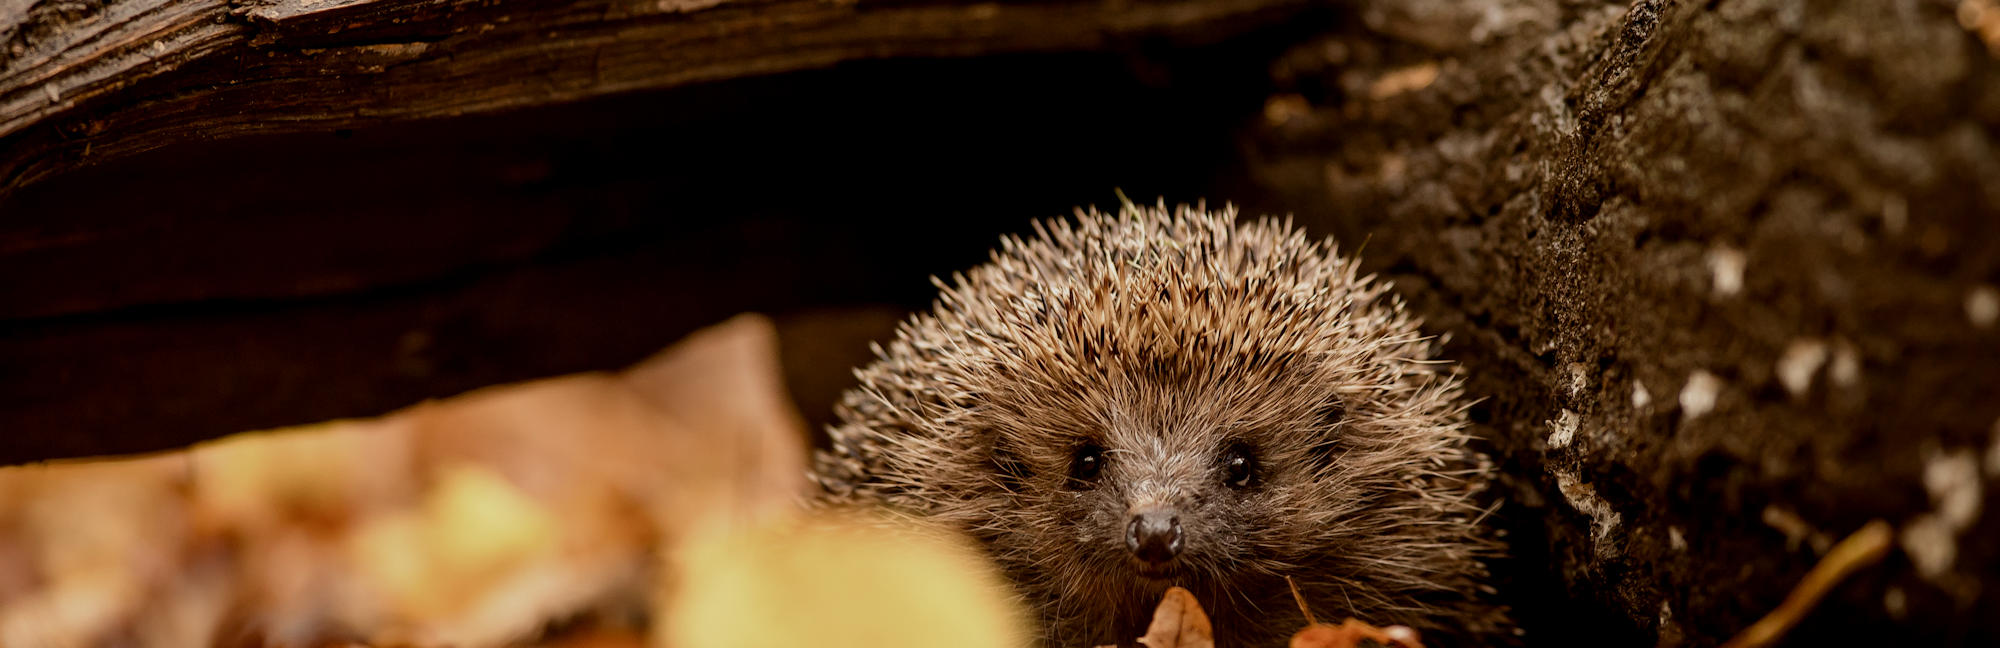 Caring for hedgehogs in your garden 